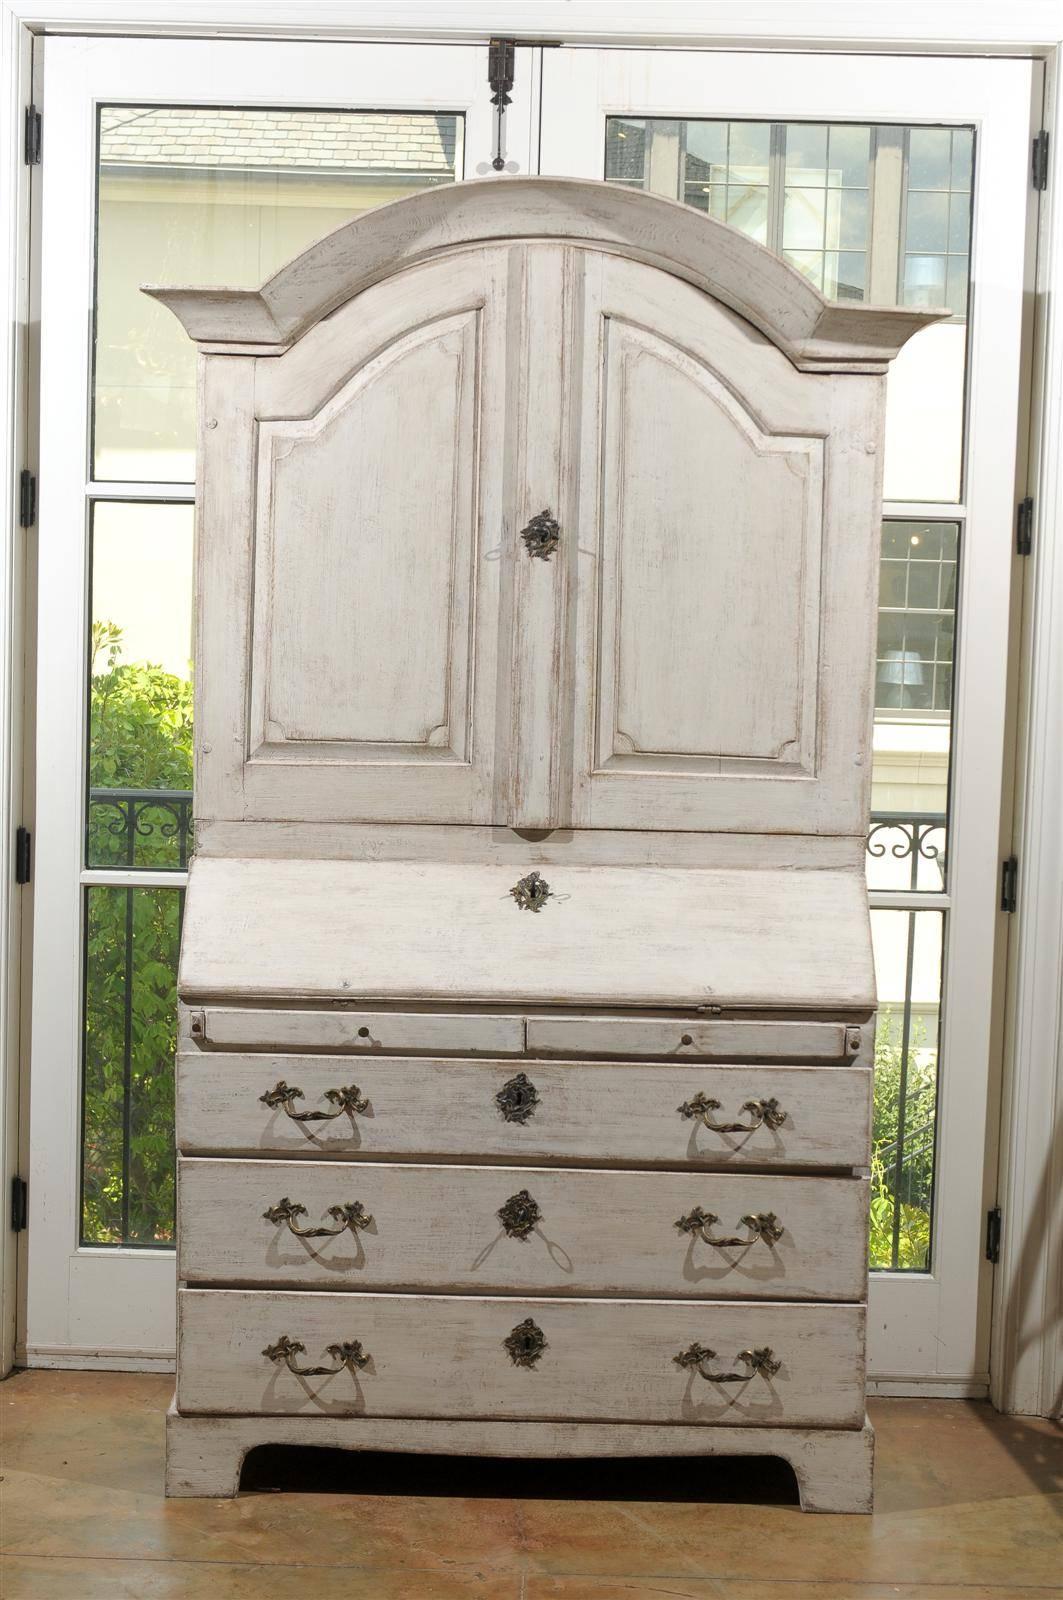 A Swedish painted wood Baroque style secretary with bonnet top, upper cabinet, slant-front desk, and lower drawers from the mid 19th century. This Swedish tall secretary features a bonnet-shaped beveled pediment, overhanging an upper cabinet made of